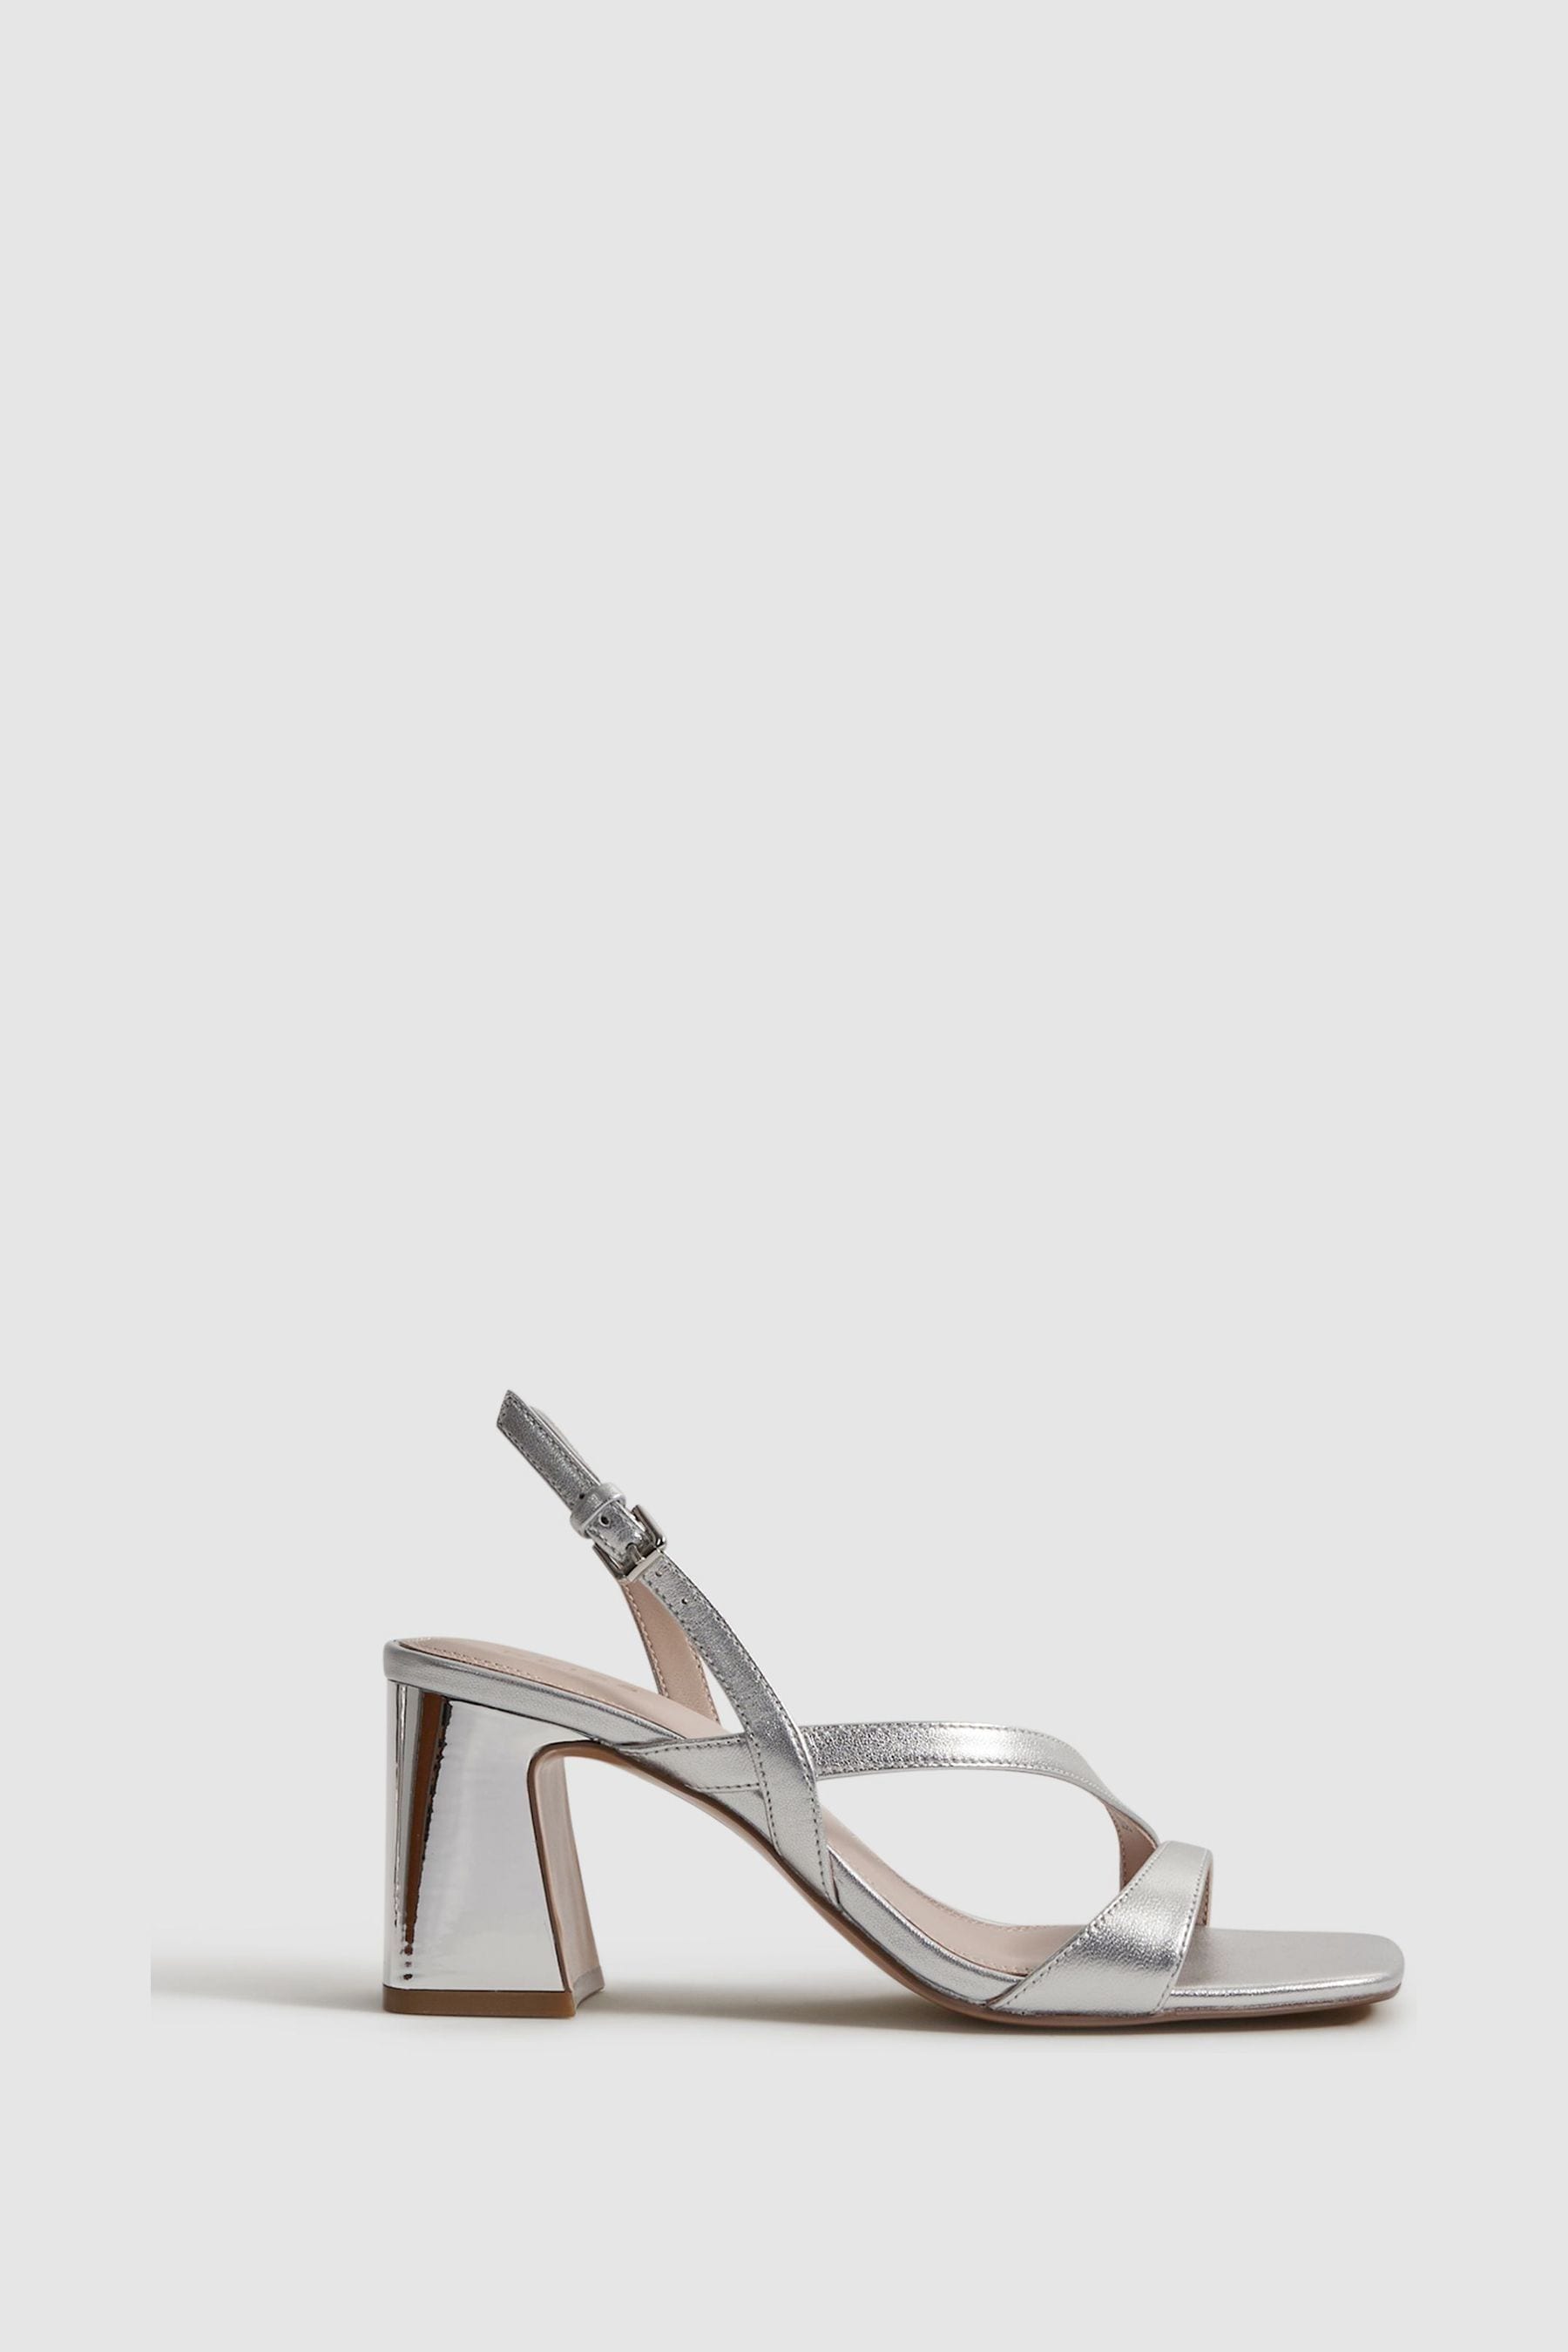 Reiss Alice - Silver Strappy Leather Heeled Sandals, Uk 6 Eu 39